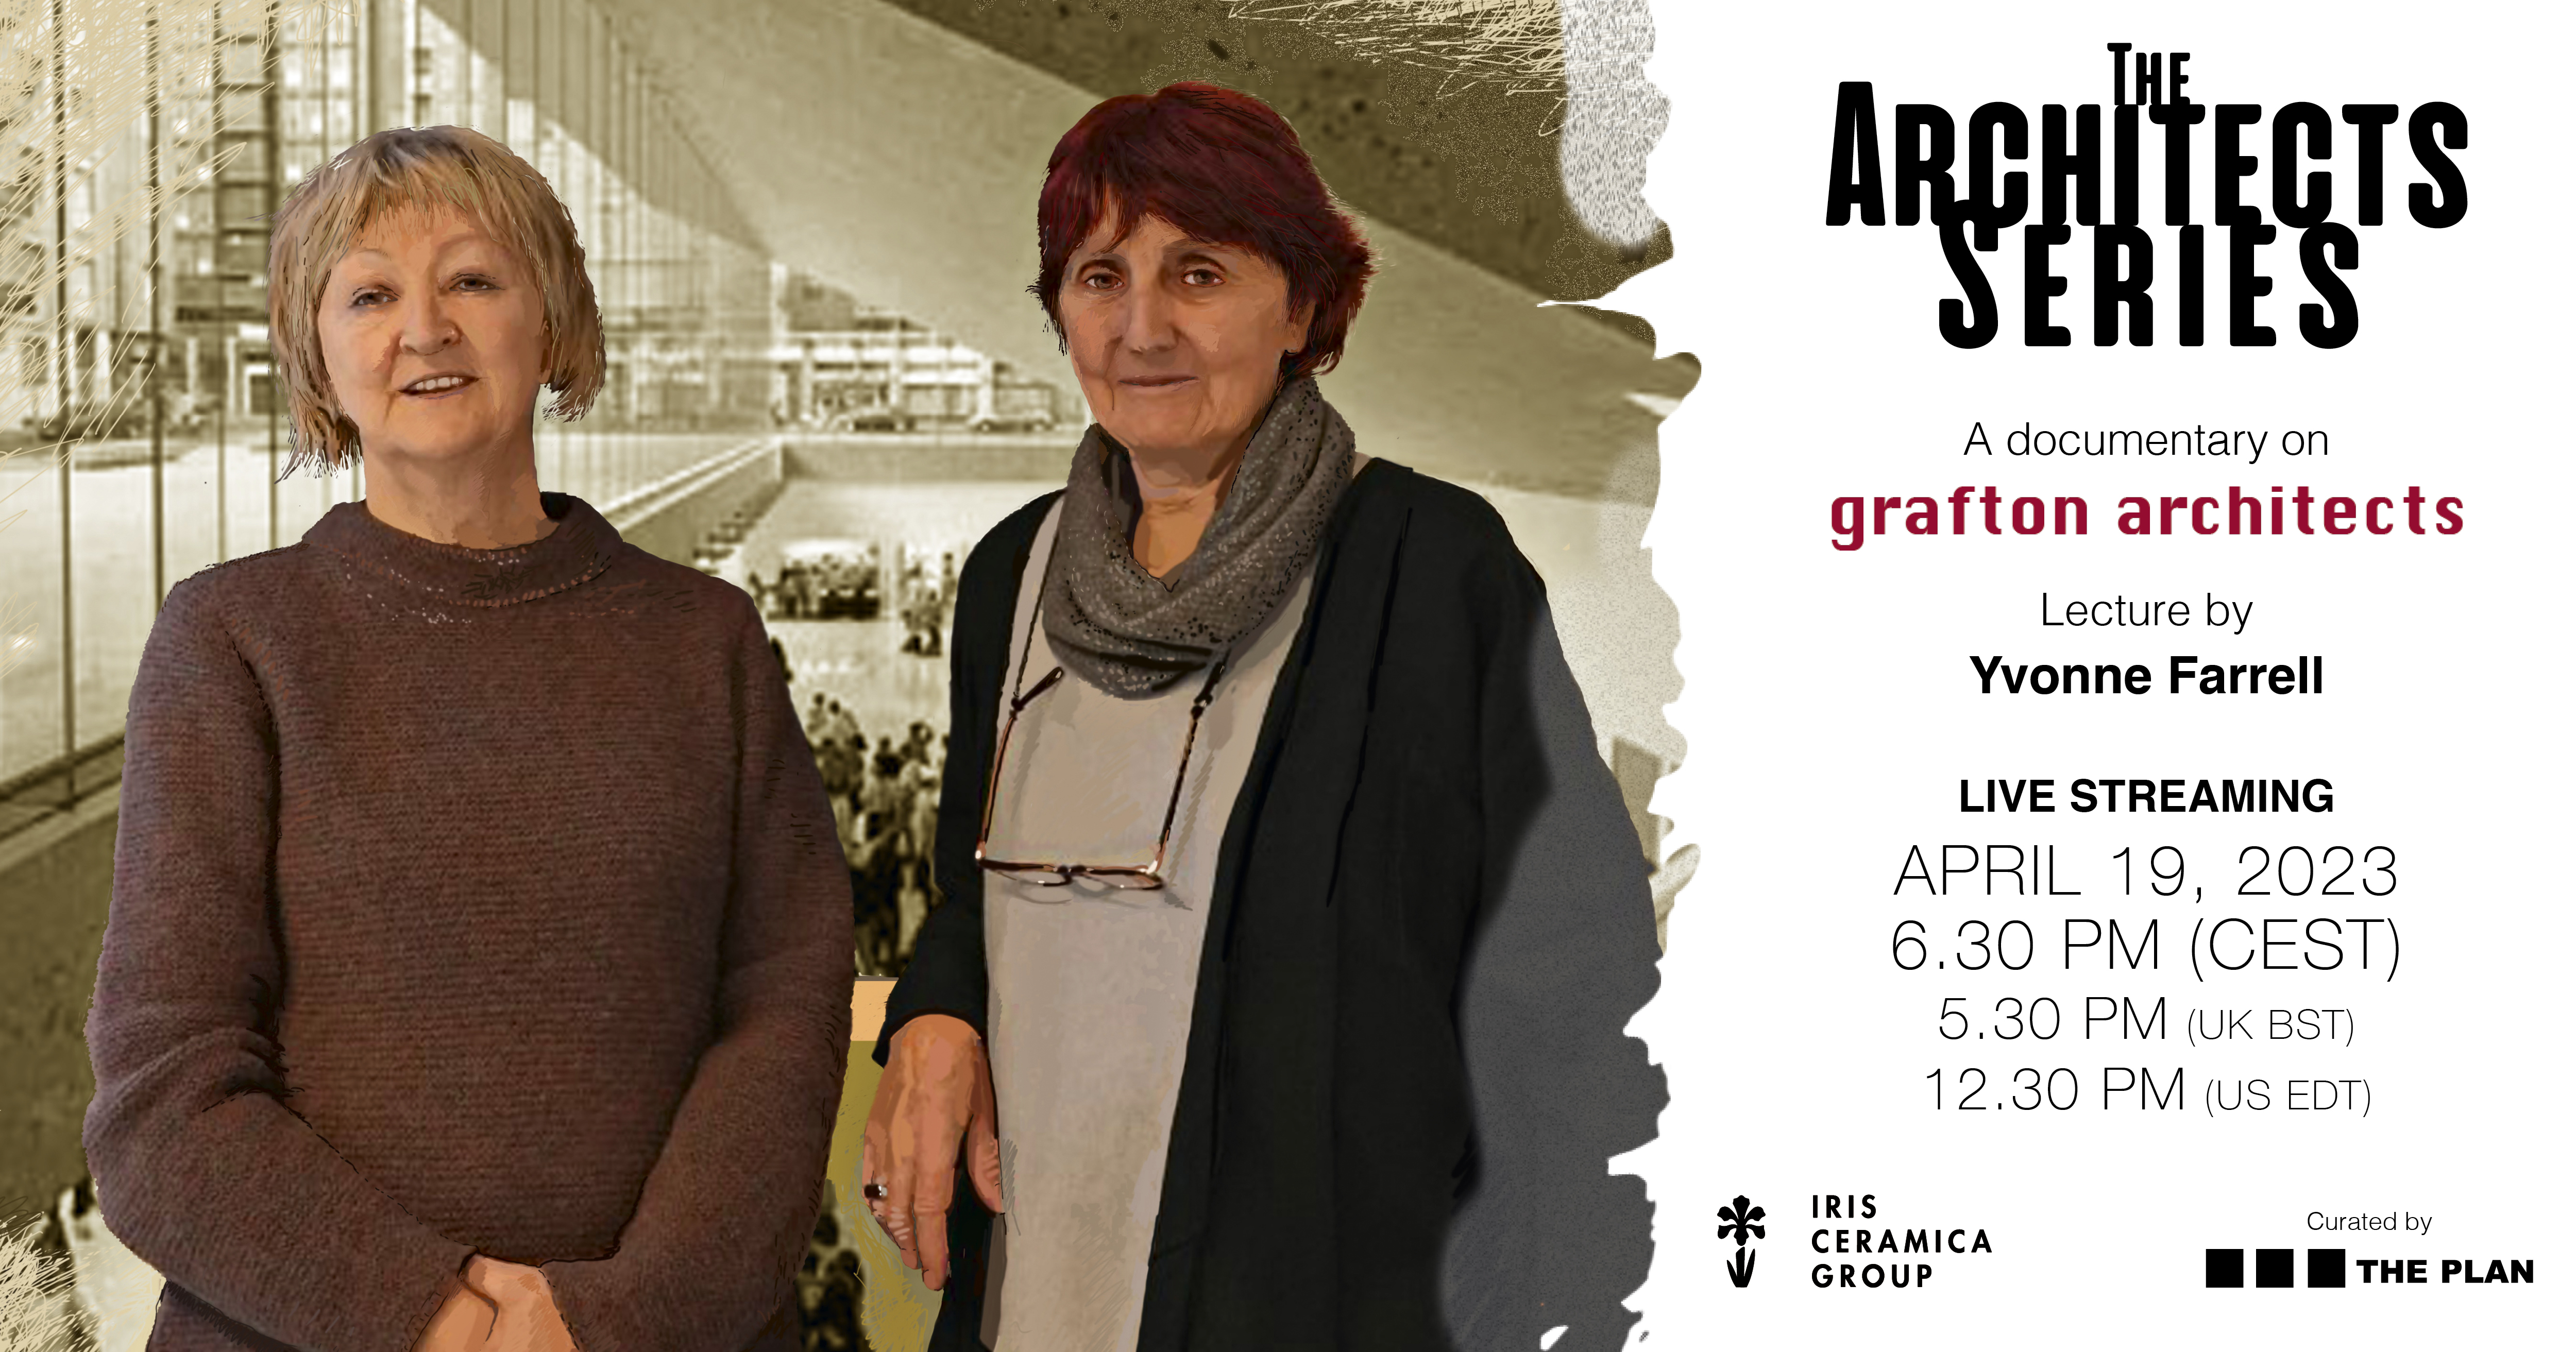 THE ARCHITECTS SERIES – A DOCUMENTARY ON: GRAFTON ARCHITECTS